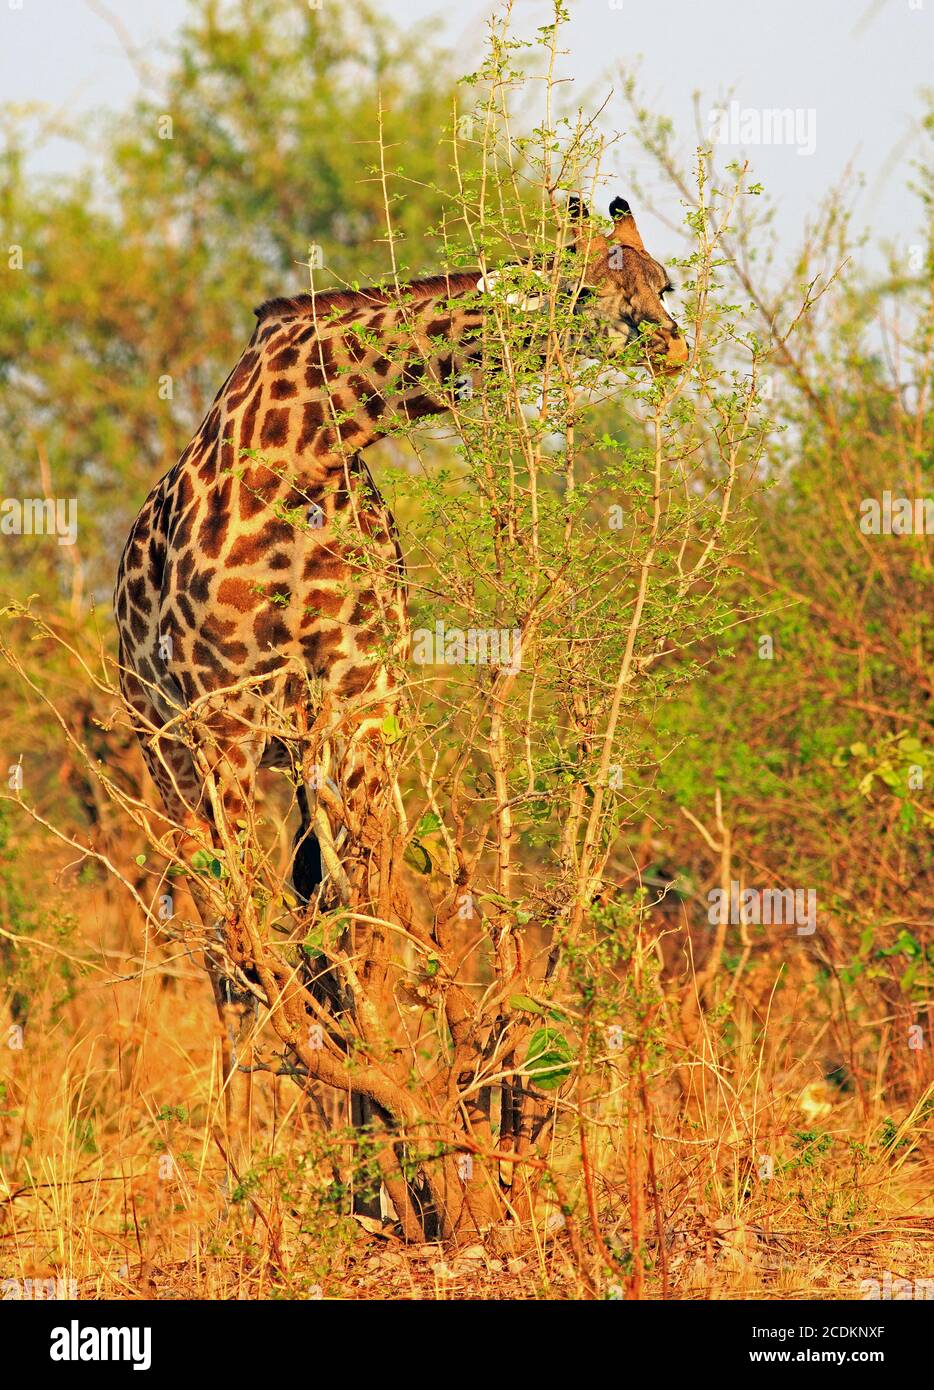 Thornicroft Giraffe -  also known as Rhodesian Giraffe -  feeding on a green vibrant bush. The Giraffe is bending slightly and is looking through the Stock Photo